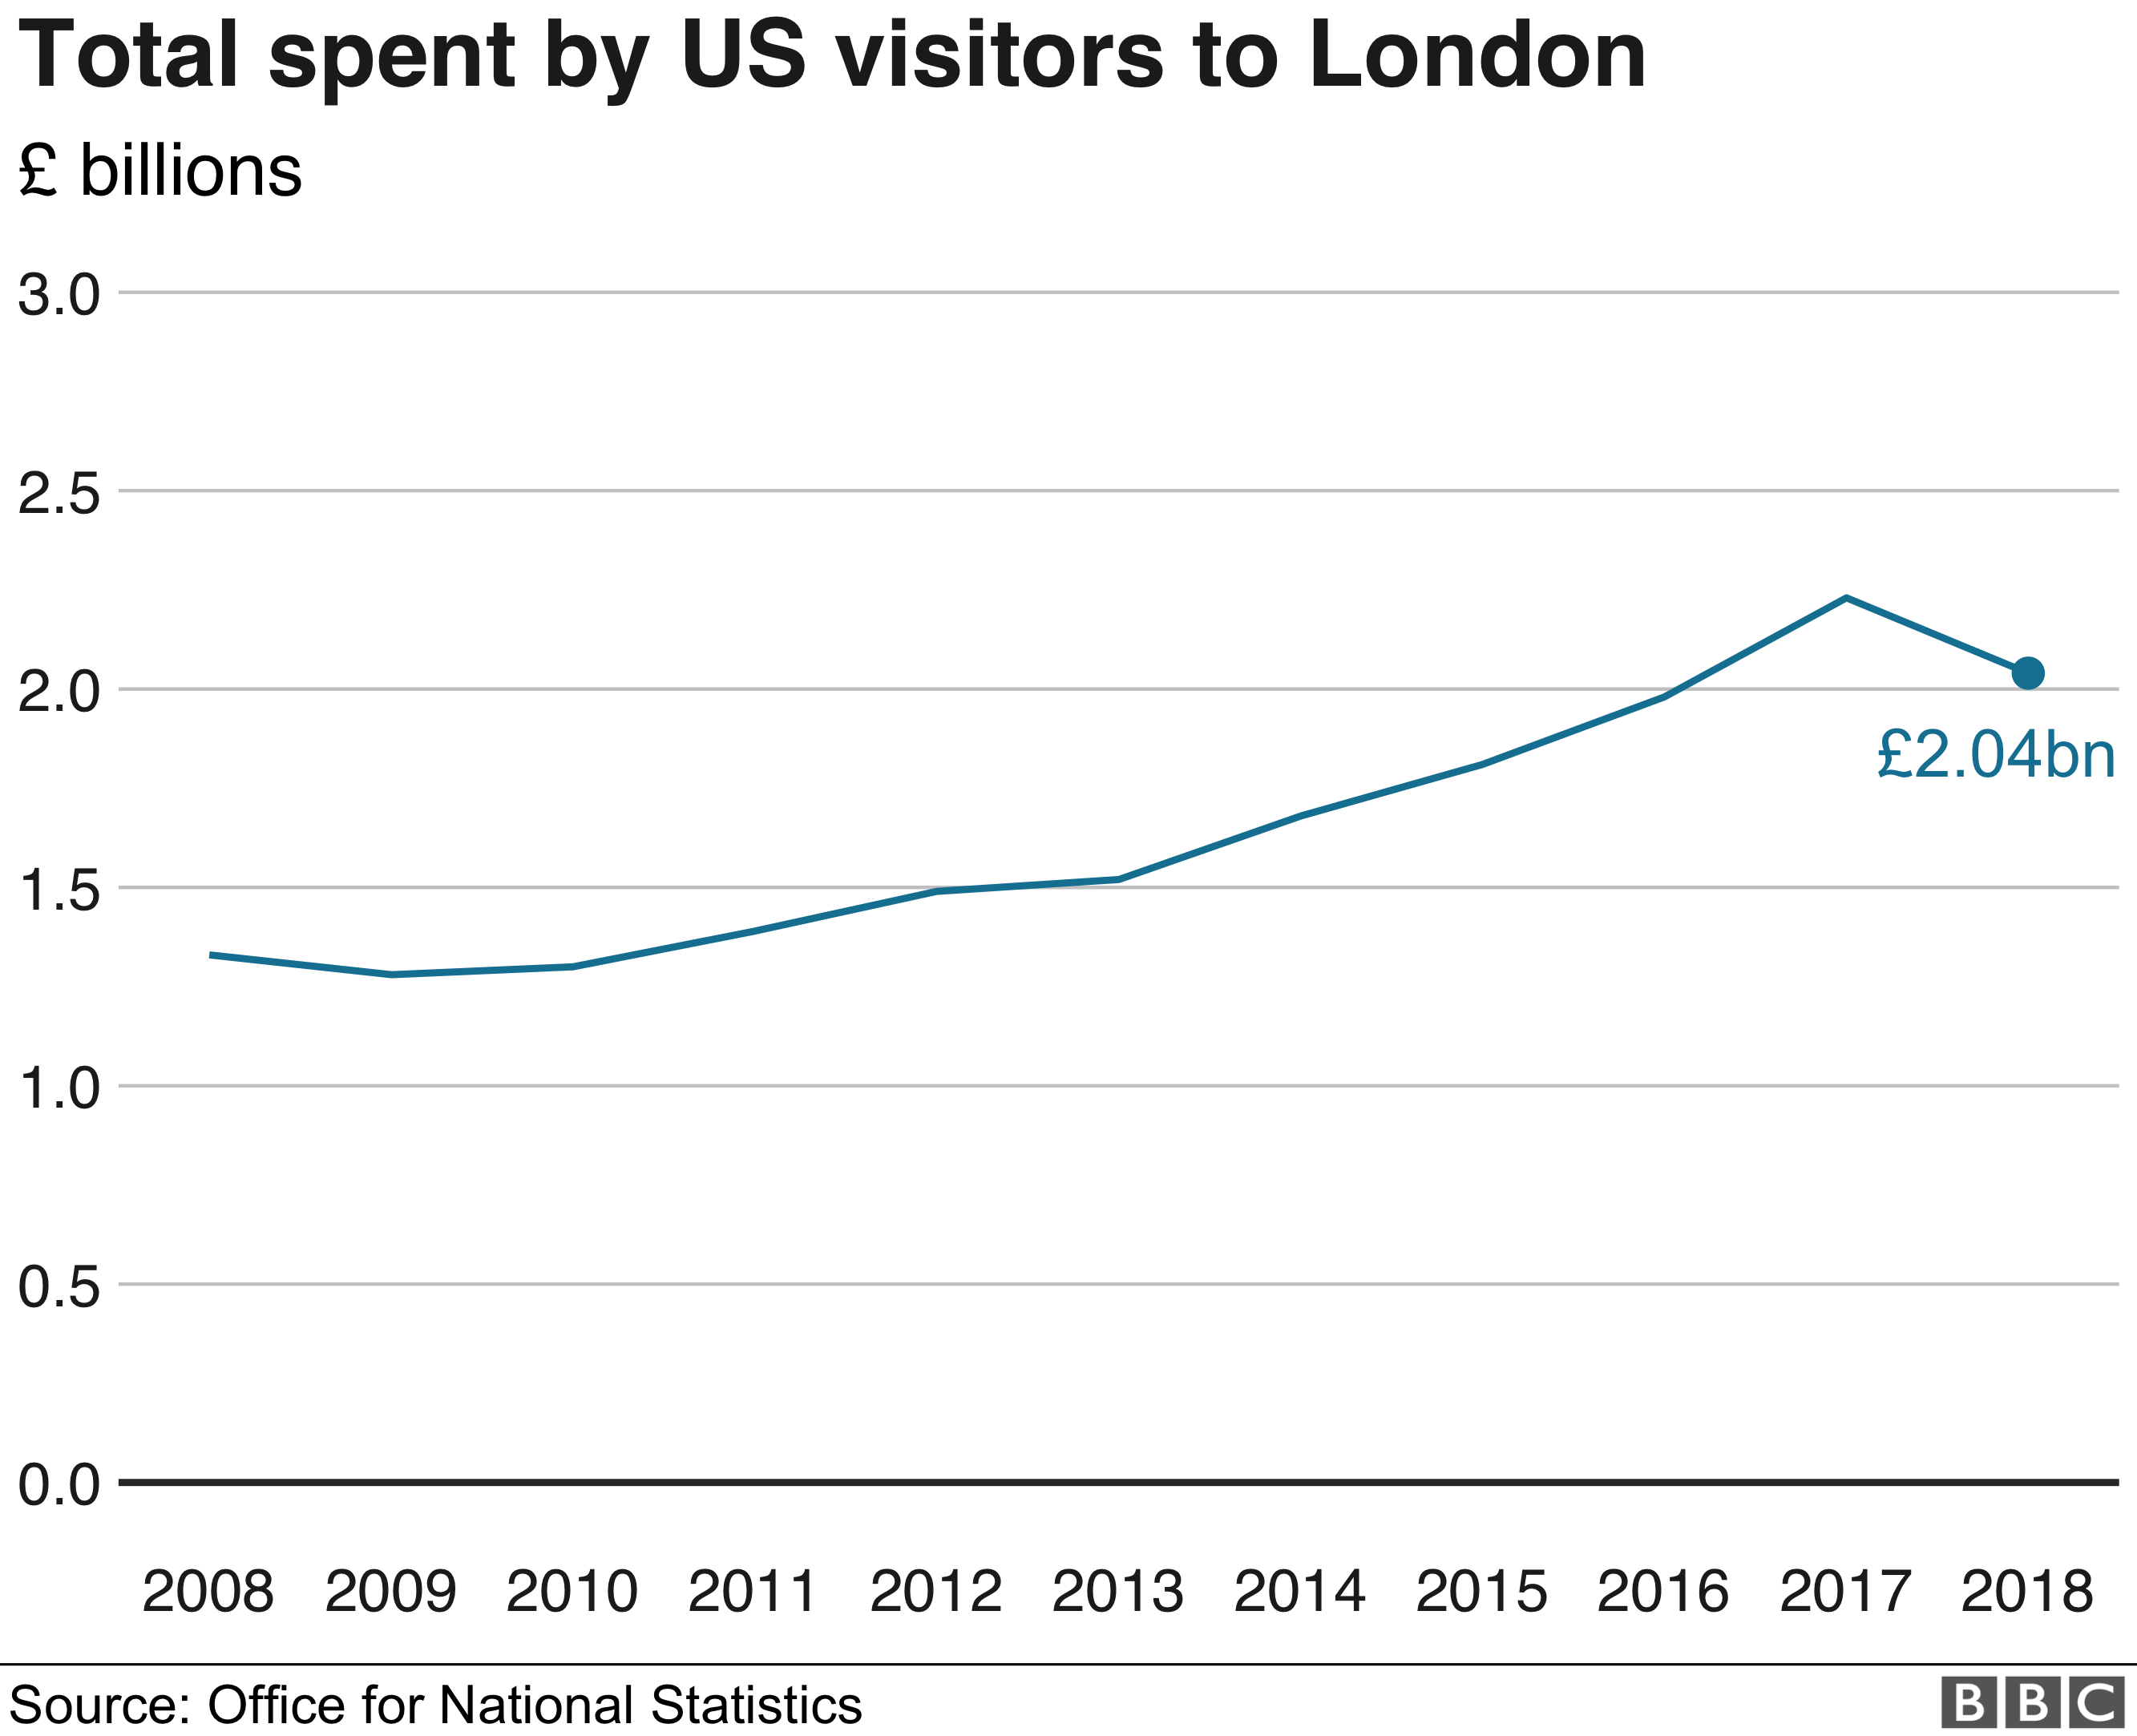 Graph showing an increase in spending by US Visitors to London over the past ten years, with the exception of 2018 when spending dipped slightly.